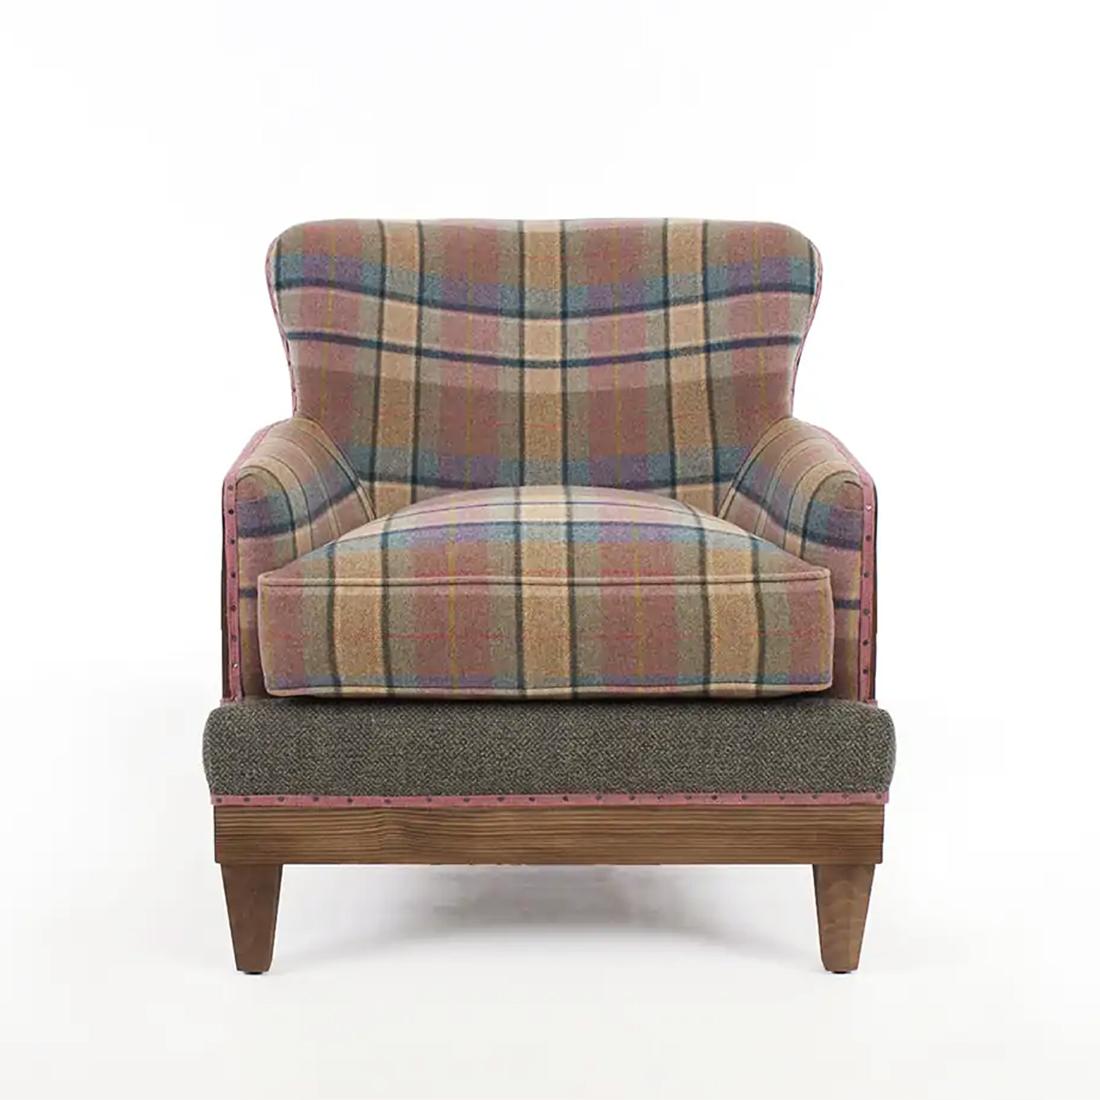 Armchair Dundee with scottish fabric in wool
with structure in solid wood. Upholstered and 
covered with high quality wooly fabric. Totally 
handmade piece.
Also available with other fabrics colors on request.